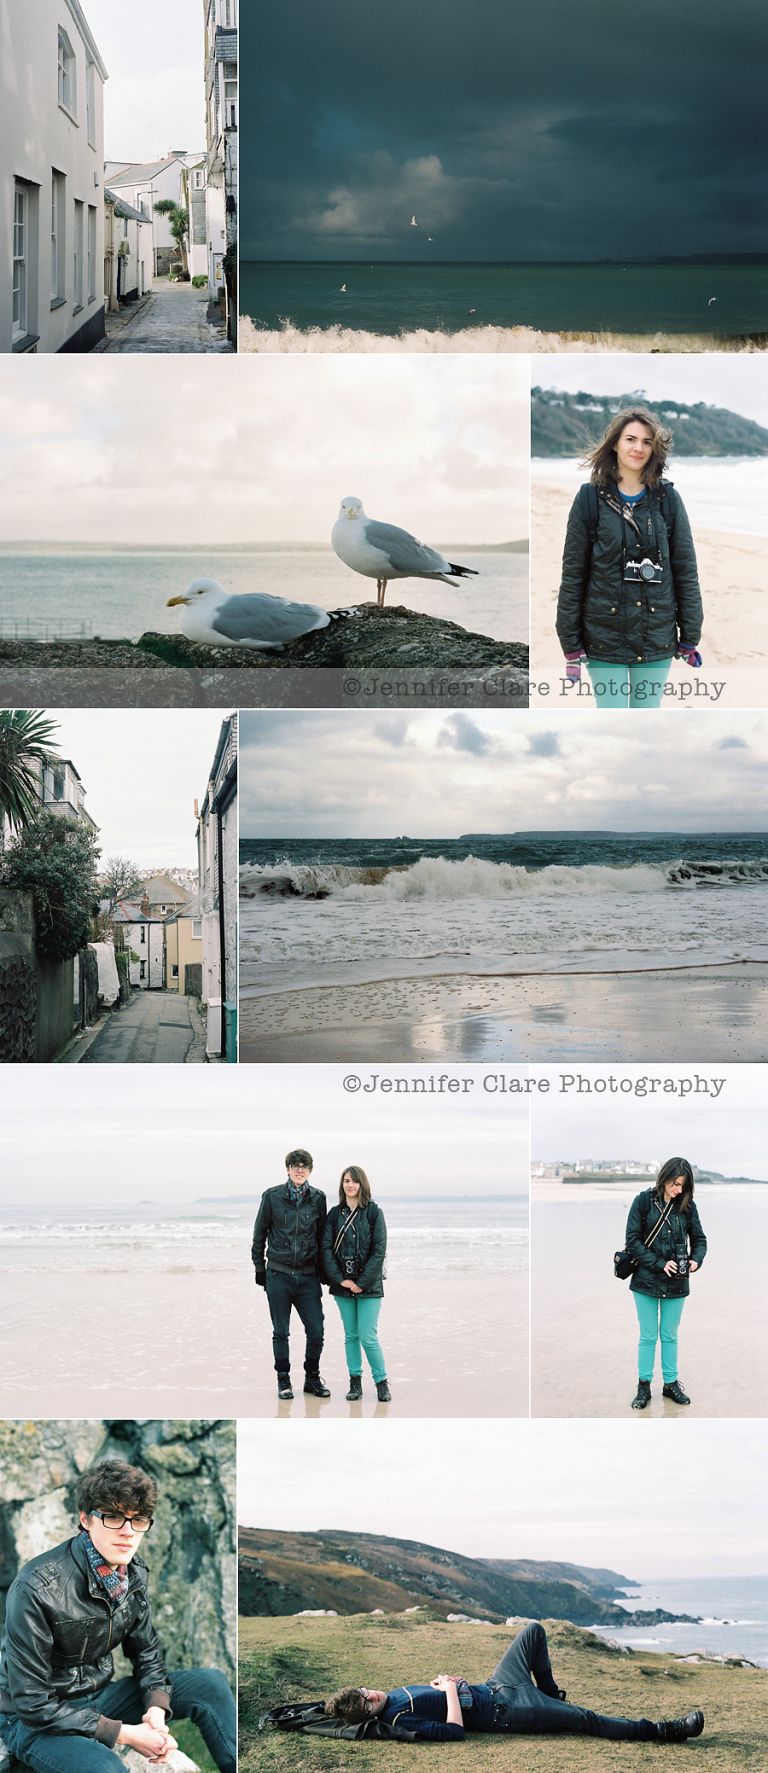 A selection of family photographs taken in St Ives, Cornwall using a 35mm film Pentax LX